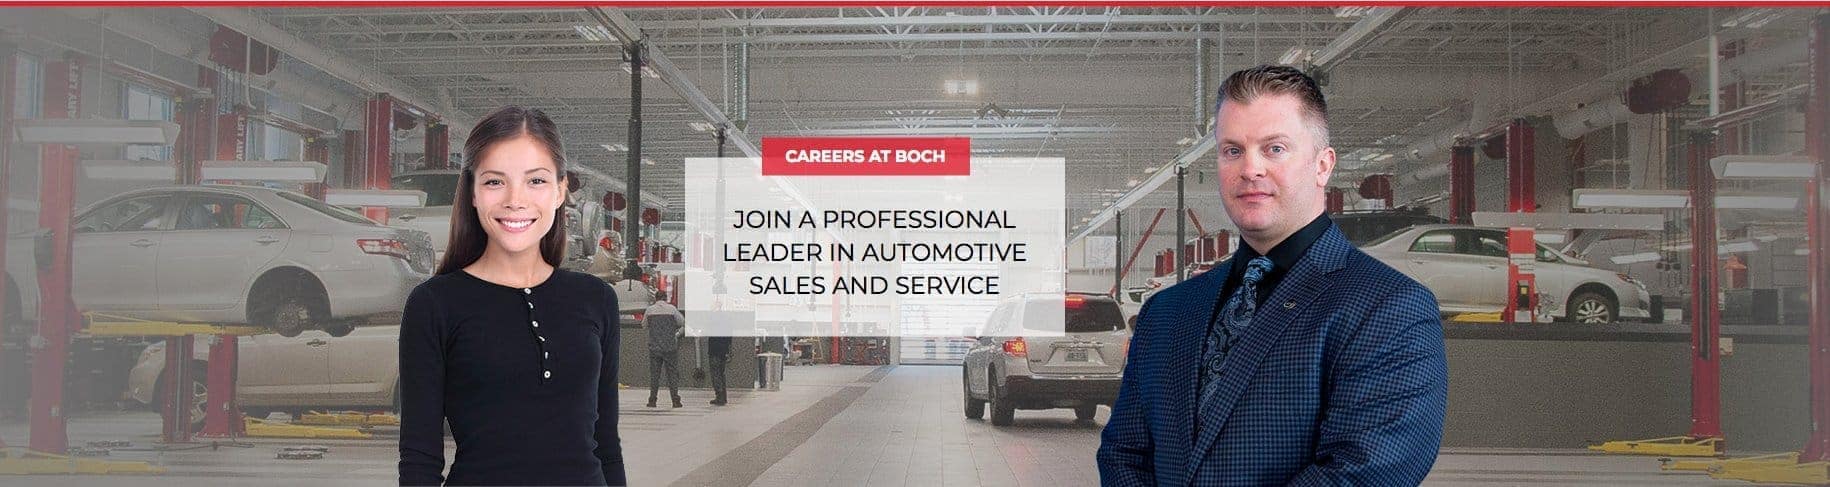 Careers at Boch